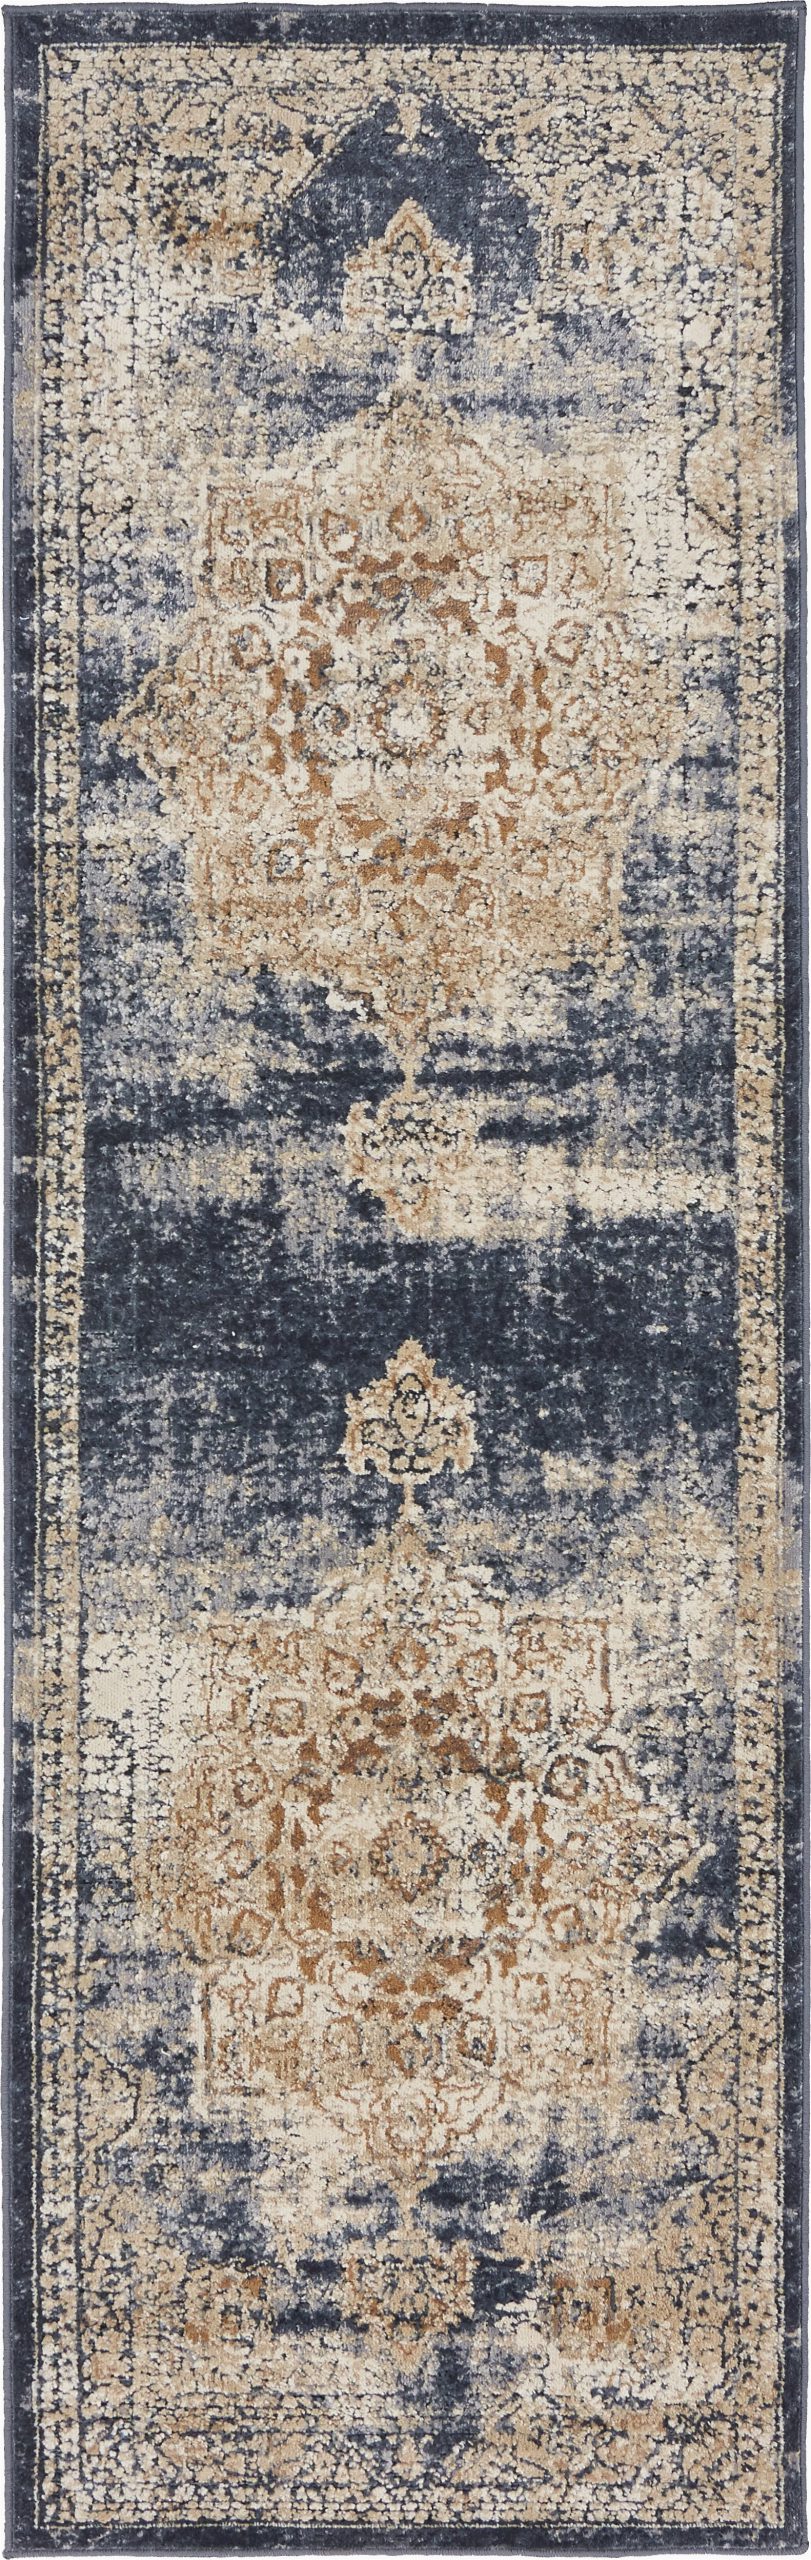 Bed Bath and Beyond Entry Rugs Modern Farmhouse Runner area Rugs You Ll Love In 2020